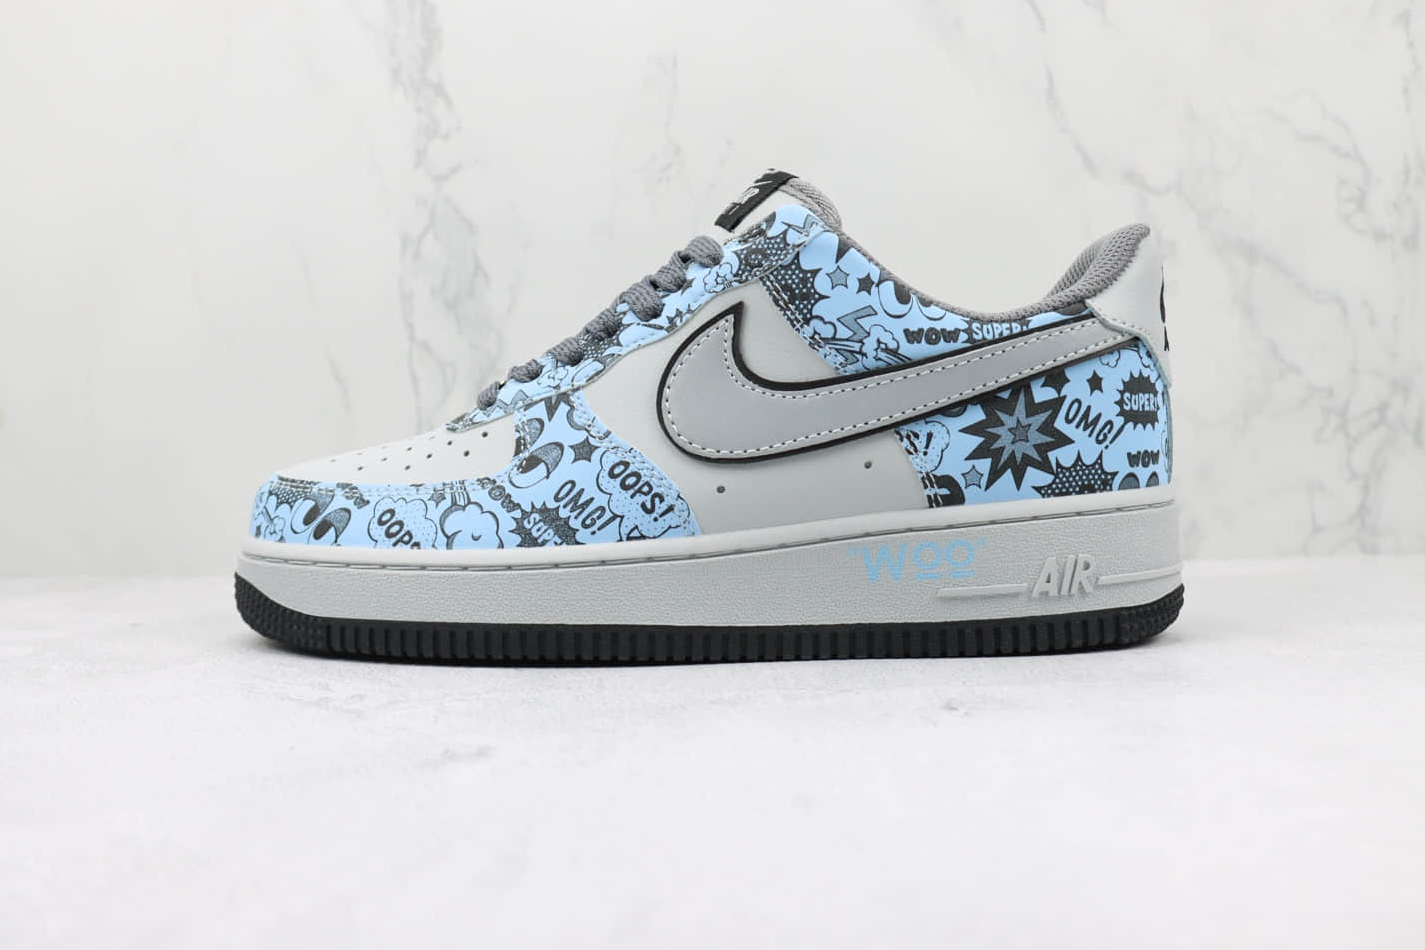 Nike Air Force 1 07 Low Smurfs Grey Blue Black ZG0088-822 - Stylish and Comfortable Shoes for Men